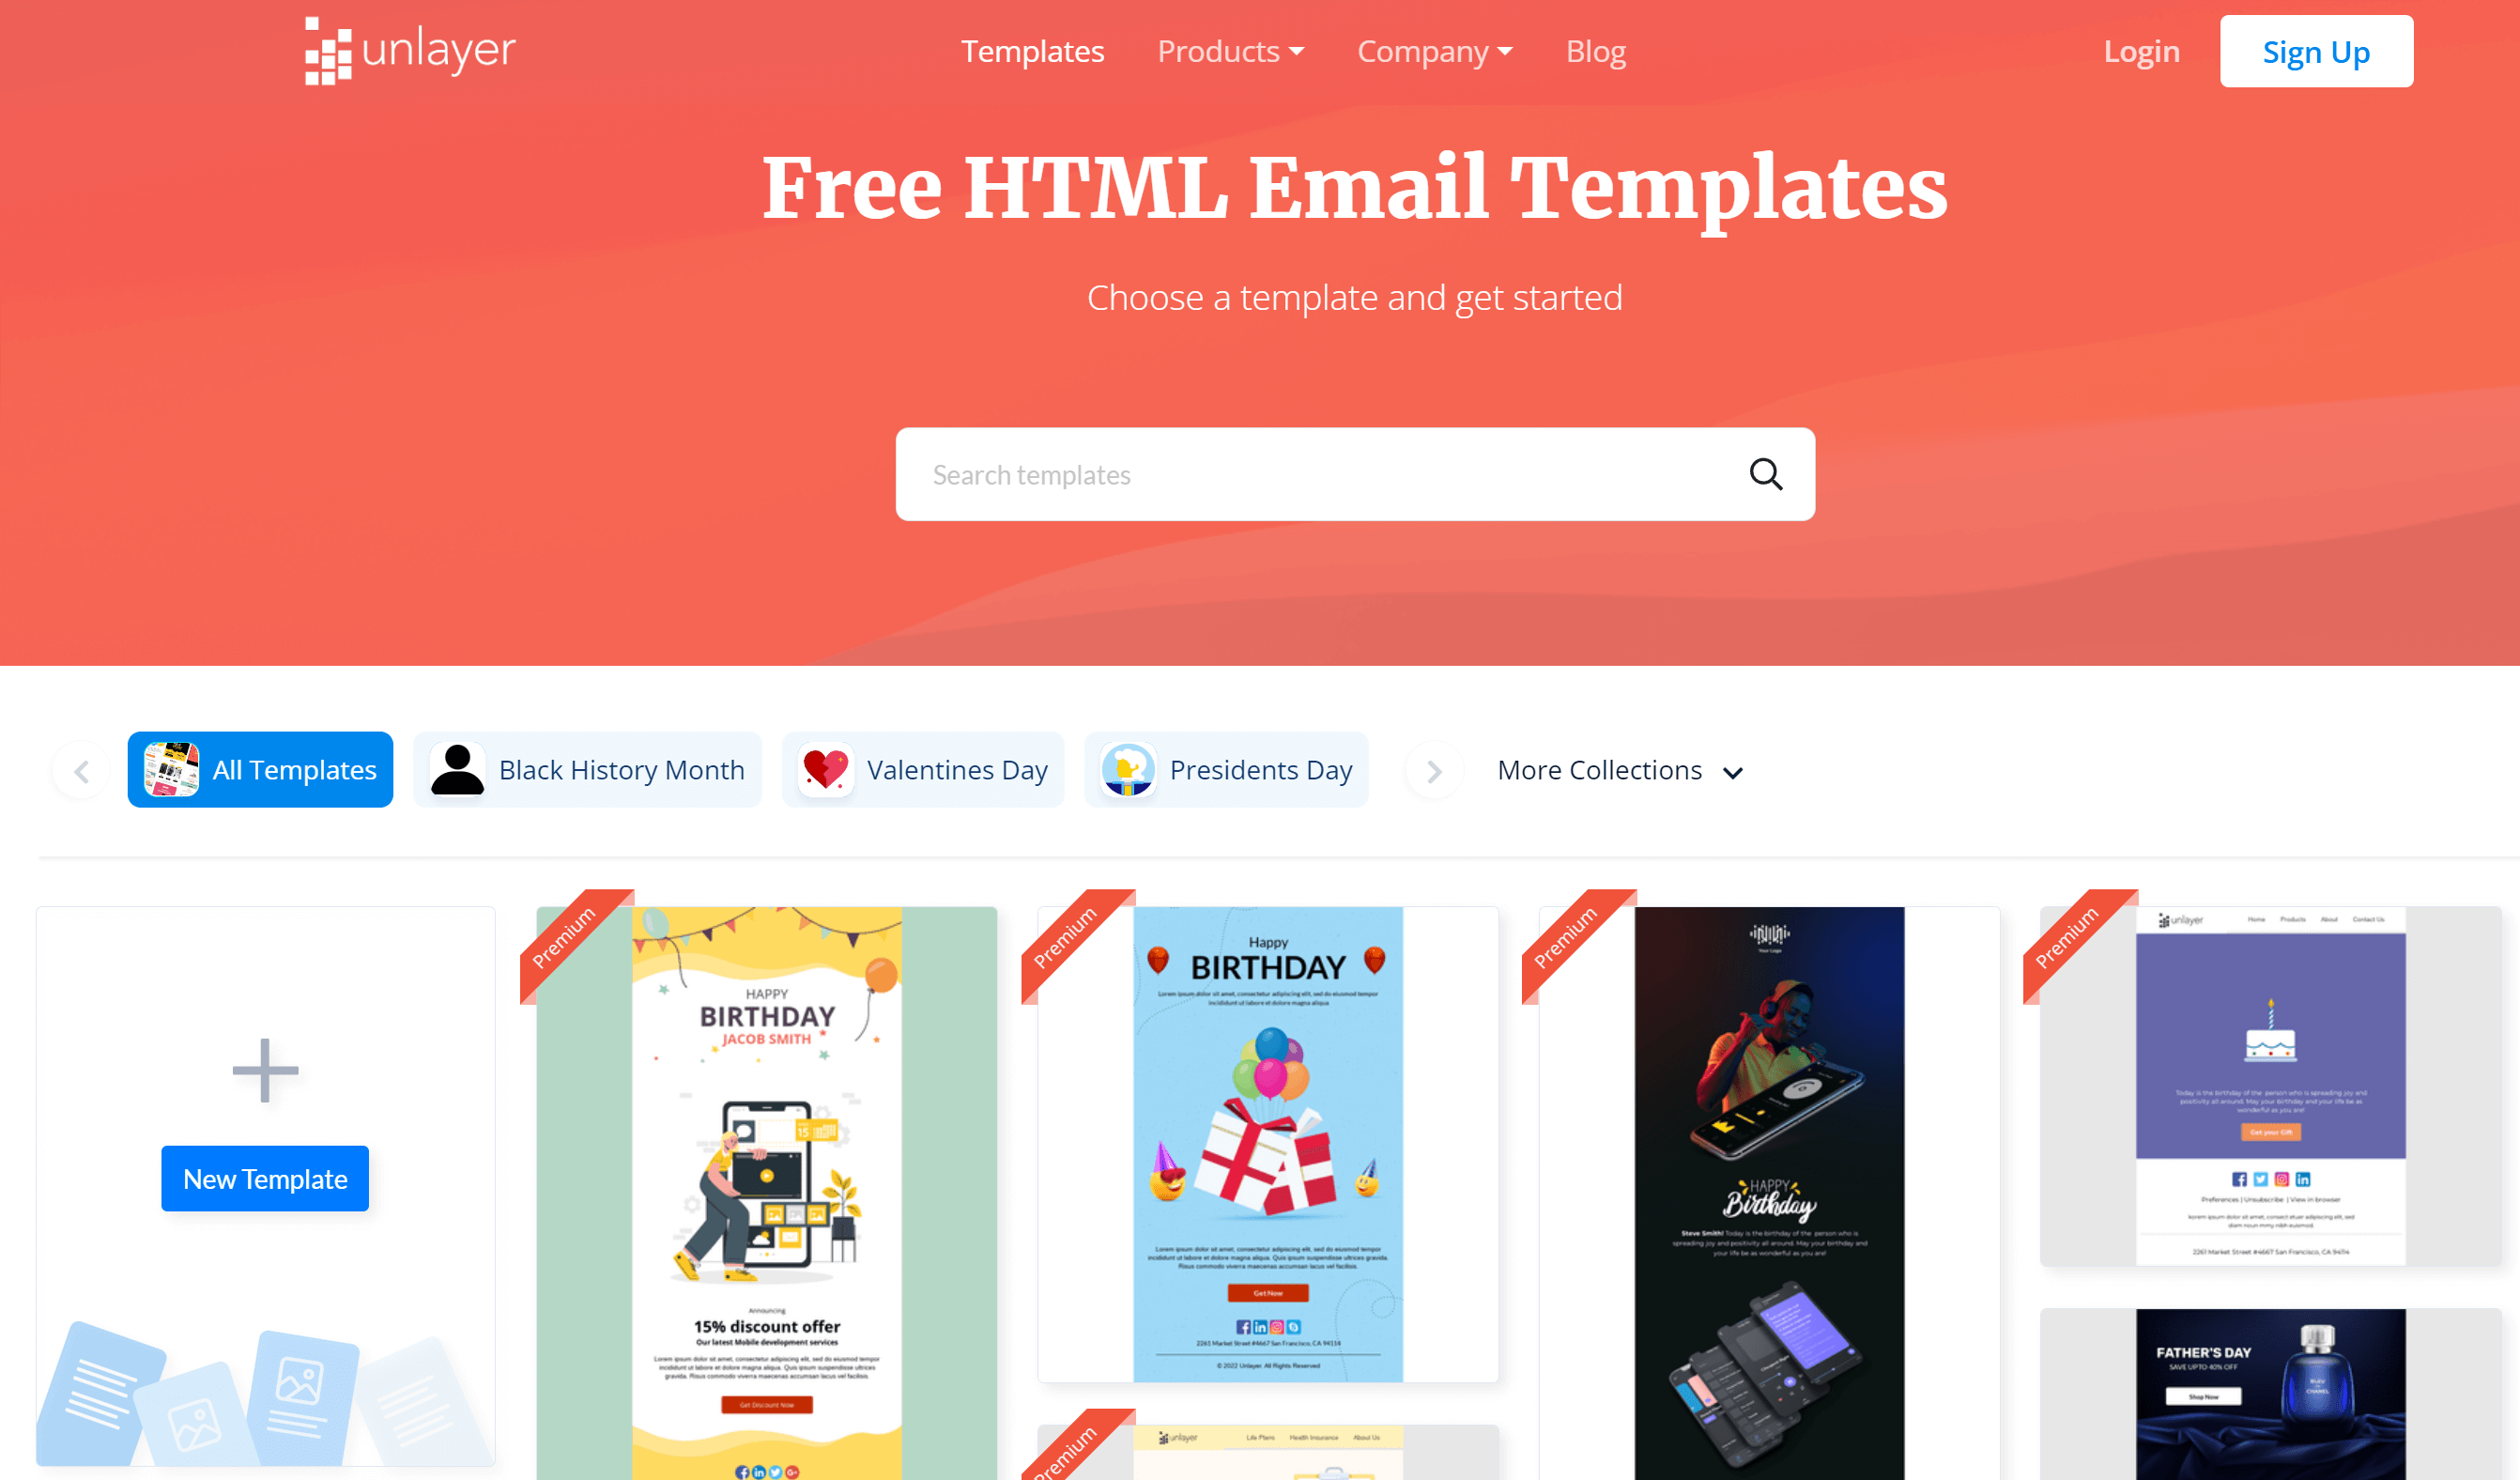 free html email templates from Unlayer